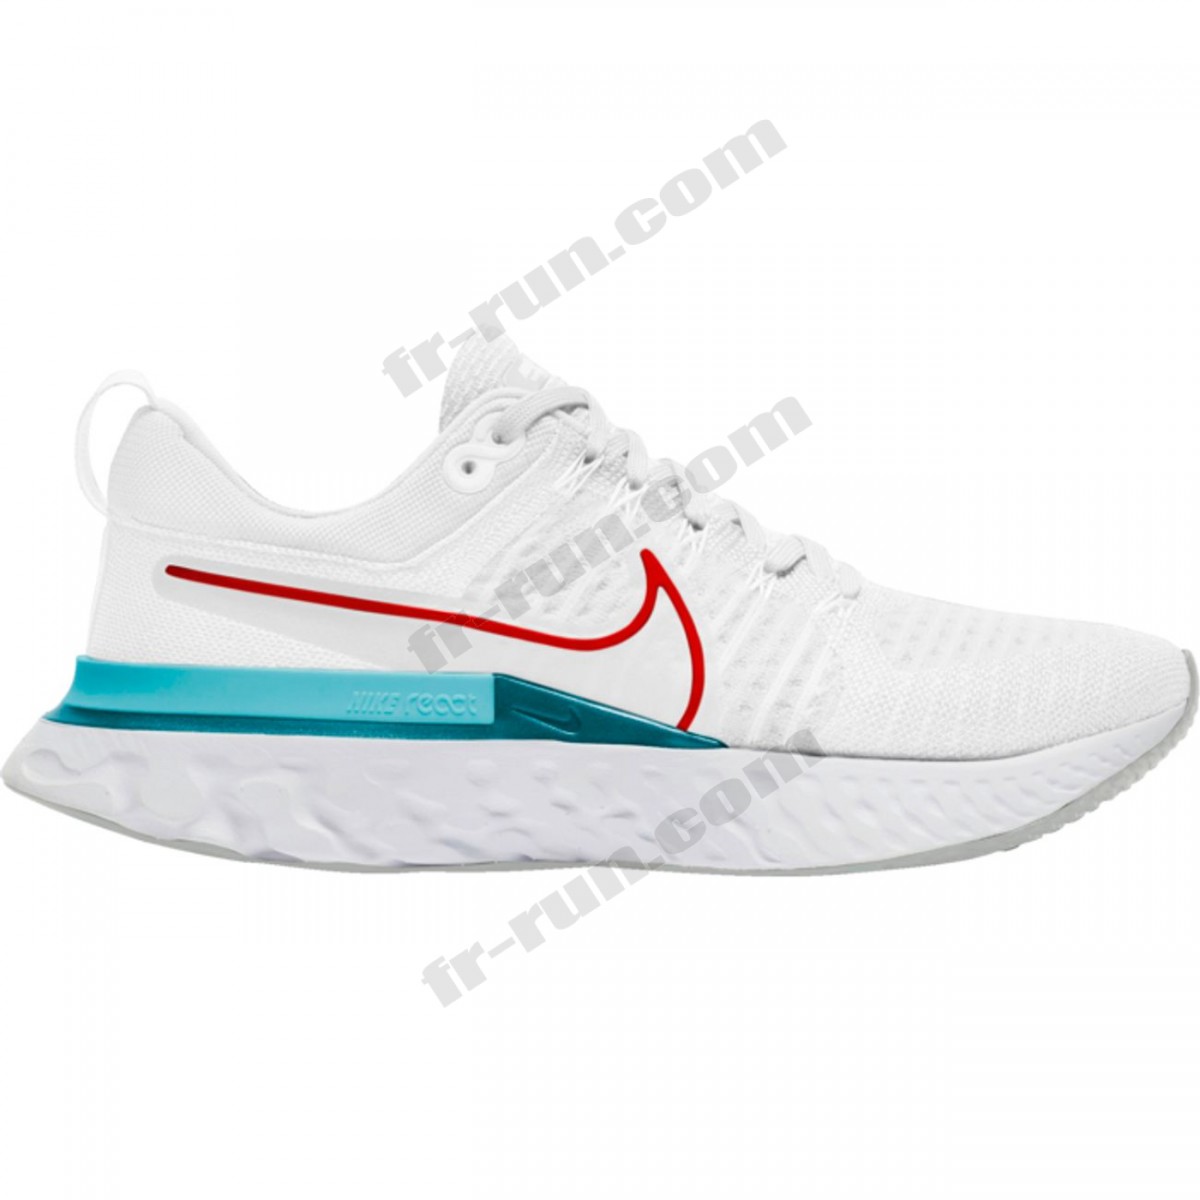 Nike/CHAUSSURES BASSES running homme NIKE NIKE REACT INFINITY RUN FK 2 √ Nouveau style √ Soldes - -0